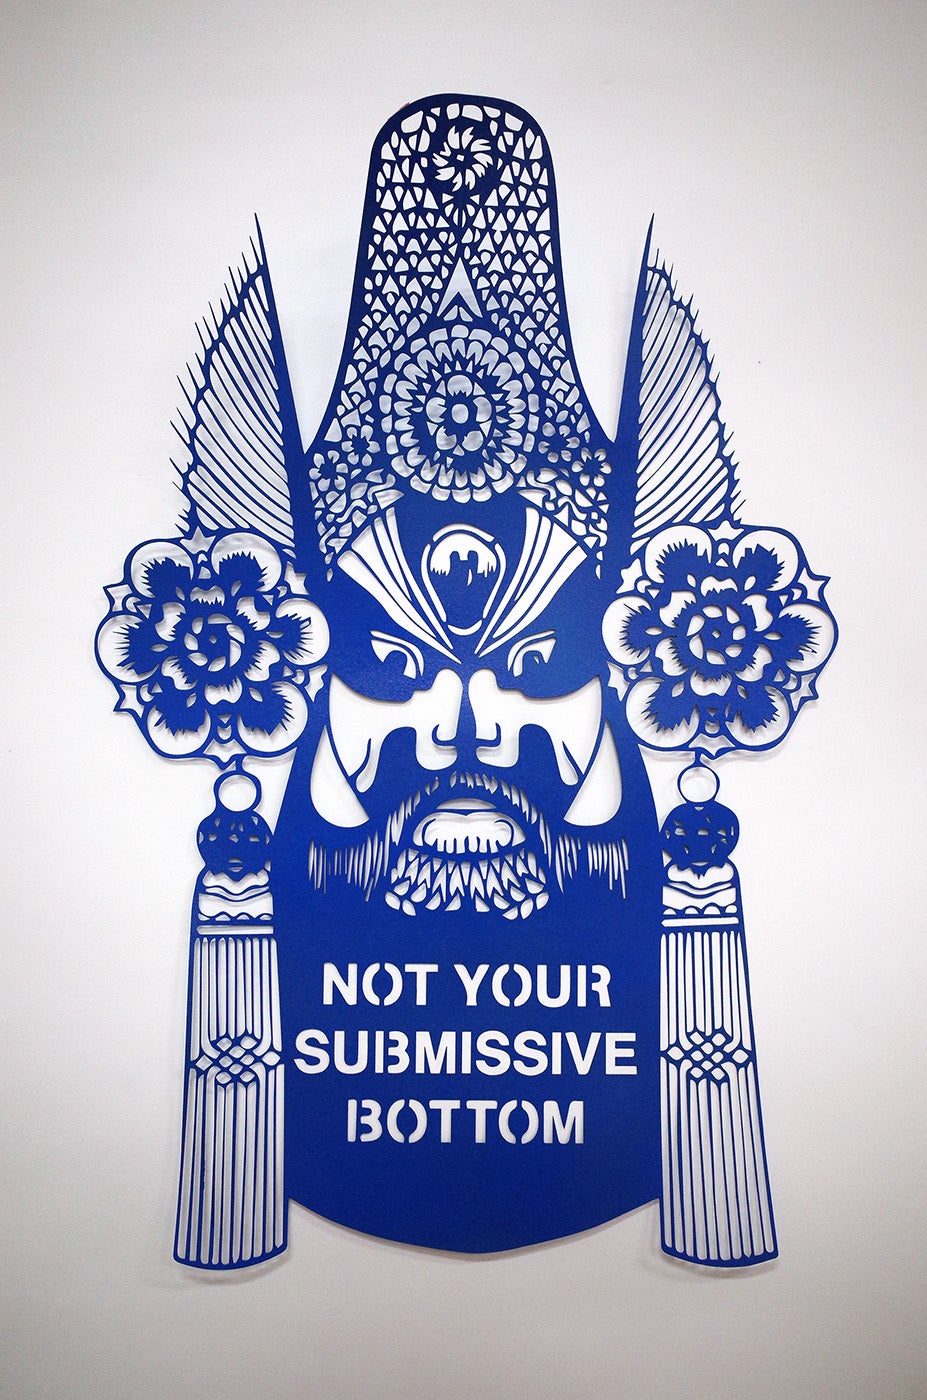 Blue paper cutting that reads "NOT YOUR SUBMISSIVE BOTTOM"